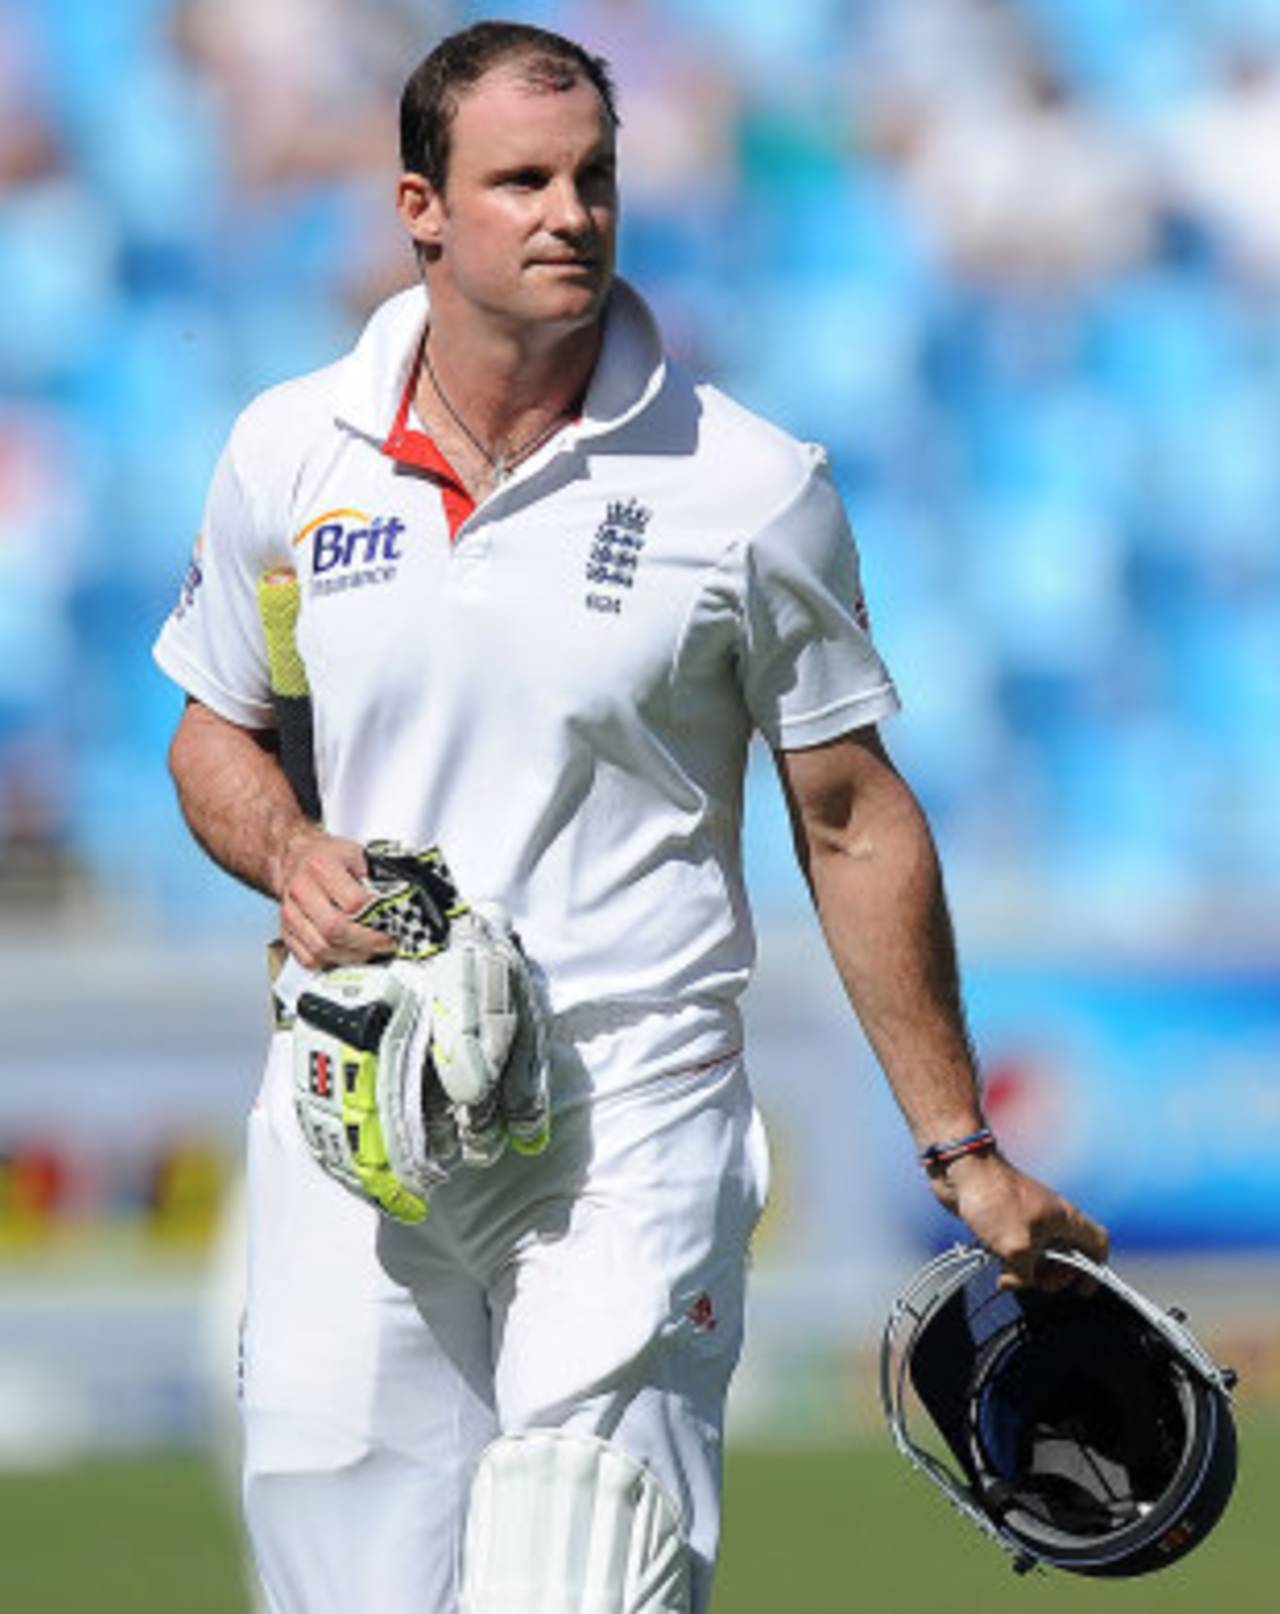 A disappointed Andrew Strauss walks back after his dismissal was upheld by the DRS, Pakistan v England, 1st Test, Dubai, 3rd day, January 19, 2012